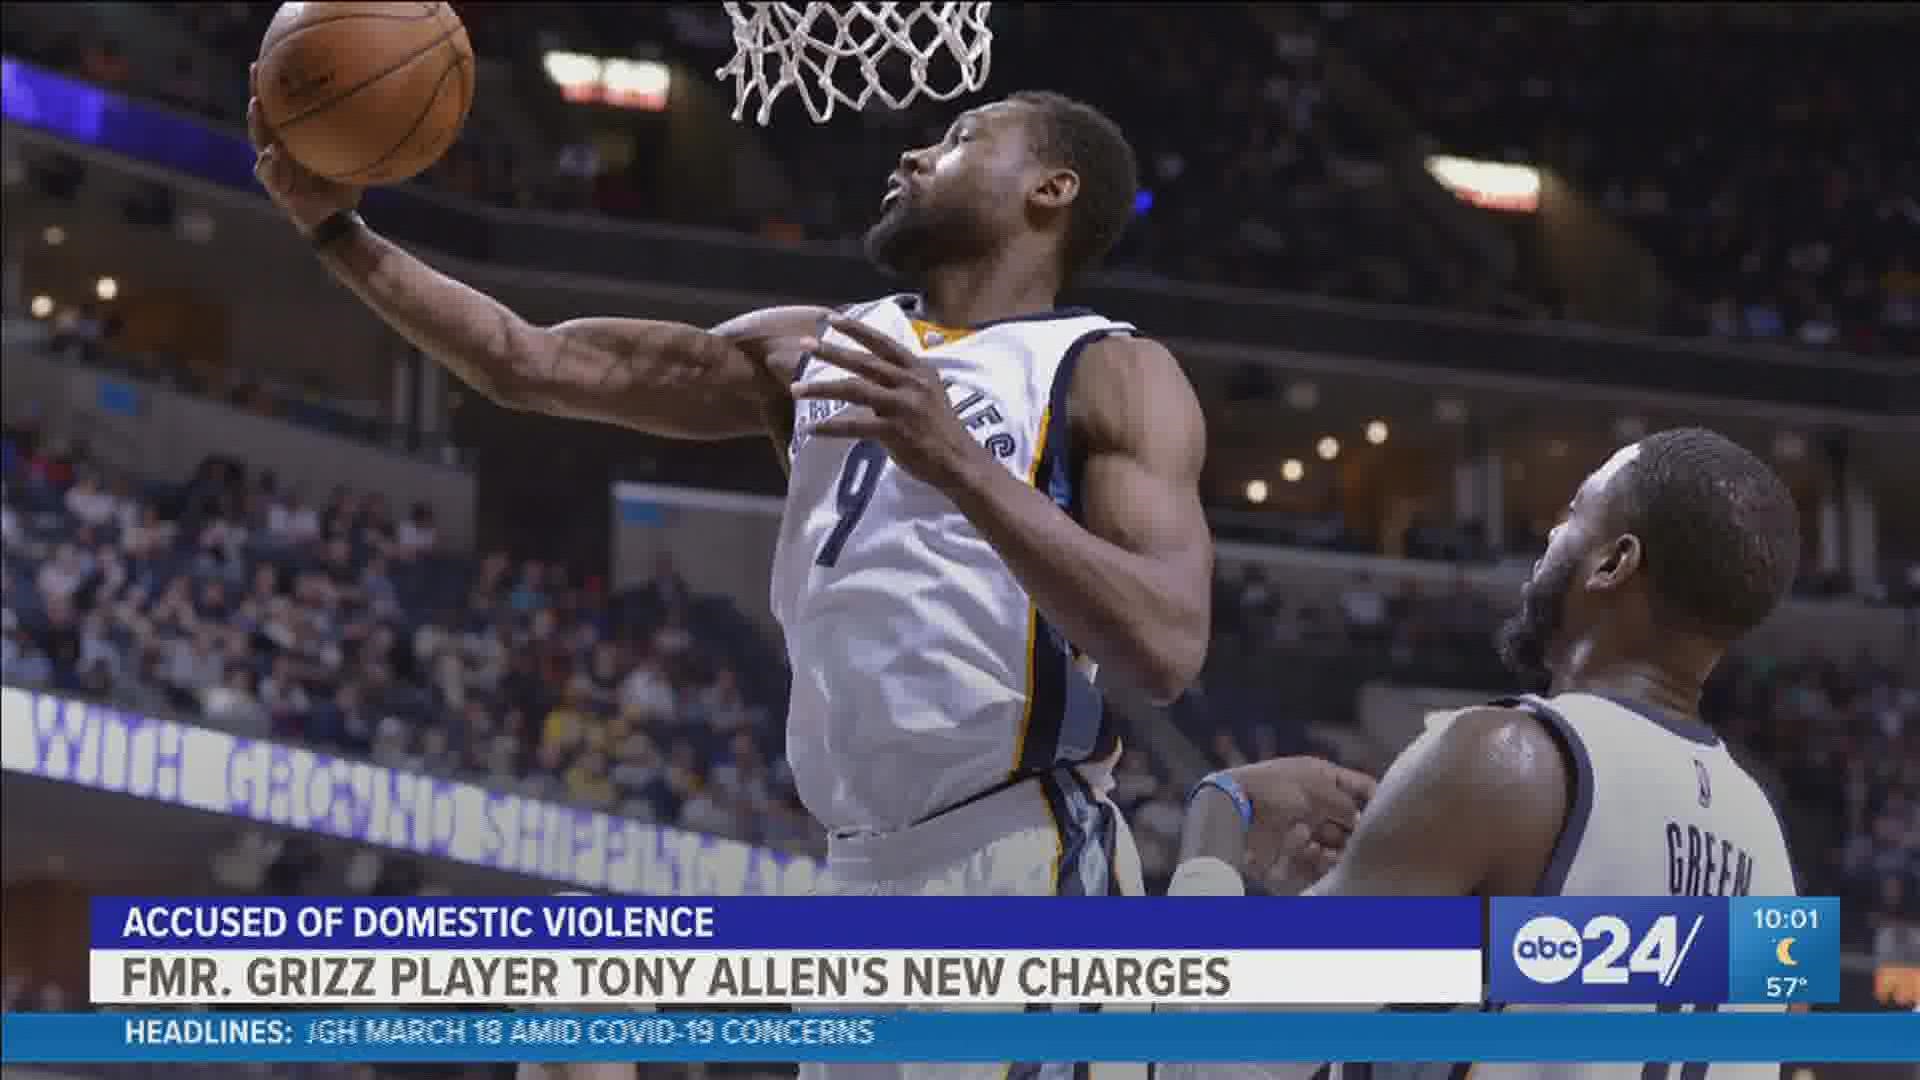 After an altercation with his wife in Collierville, Tony Allen was charged with Domestic Violence.